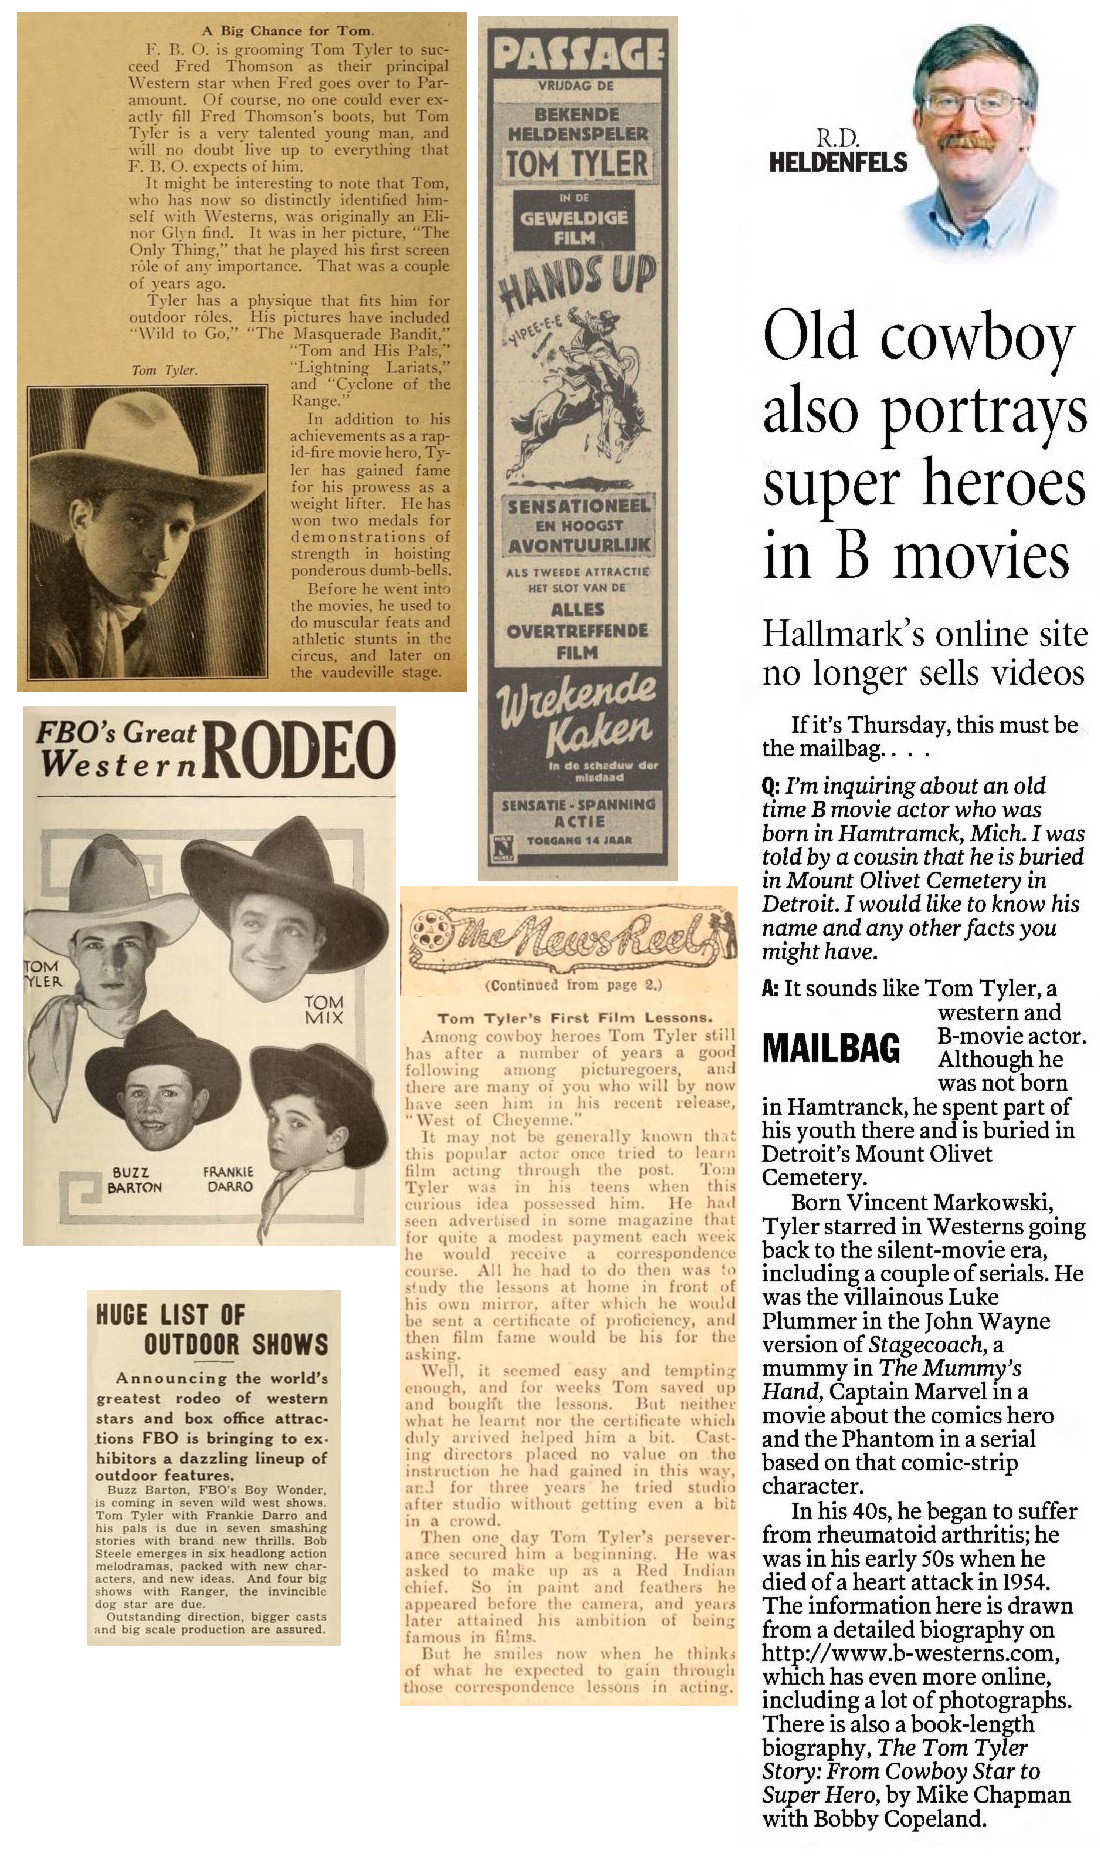 A big chance for Tom, Old cowboy also portrays superheros, FBO's great western rodeo, Tom Tyler's first film lesson